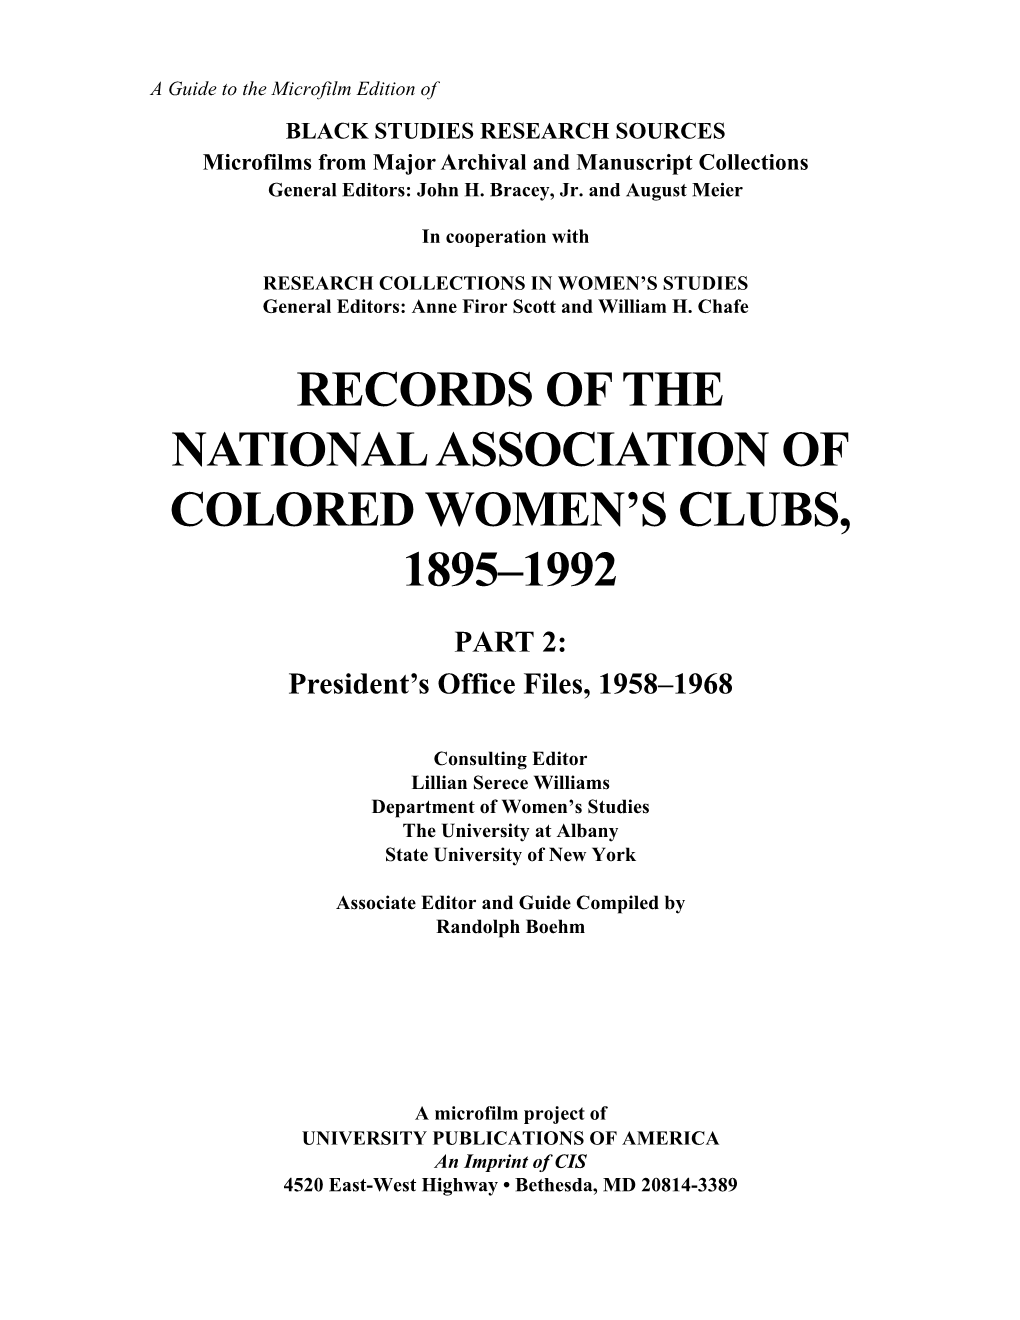 Records of the National Association of Colored Women's Clubs, 1895–1992